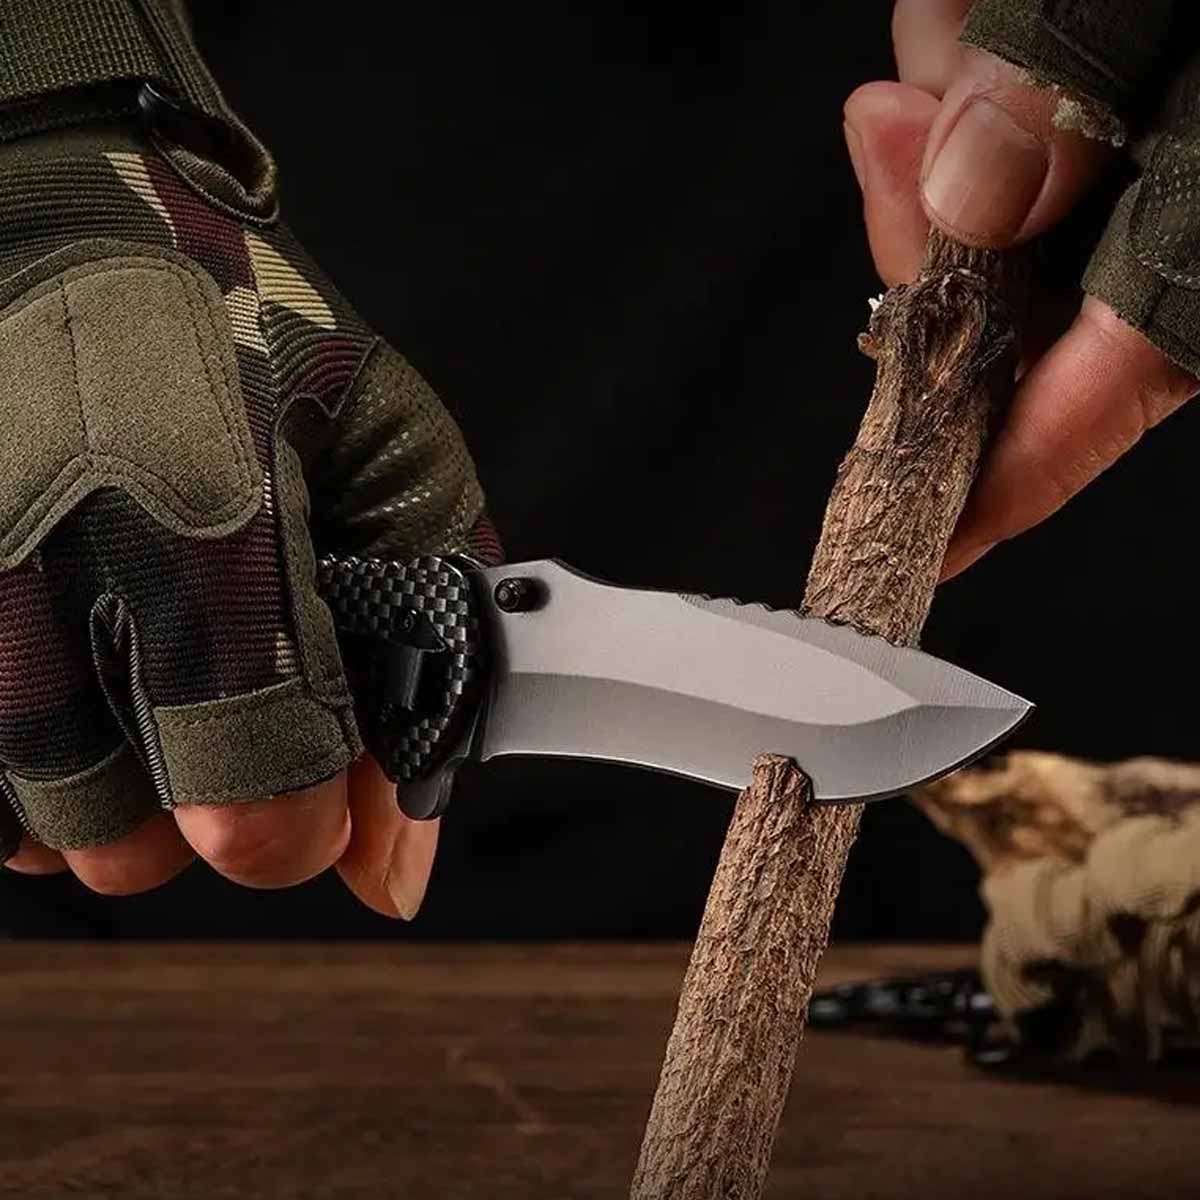 Beautifully crafted, high-hardness multi-purpose stainless steel camping or survival knife featuring a hardwood grip. American Outfitters